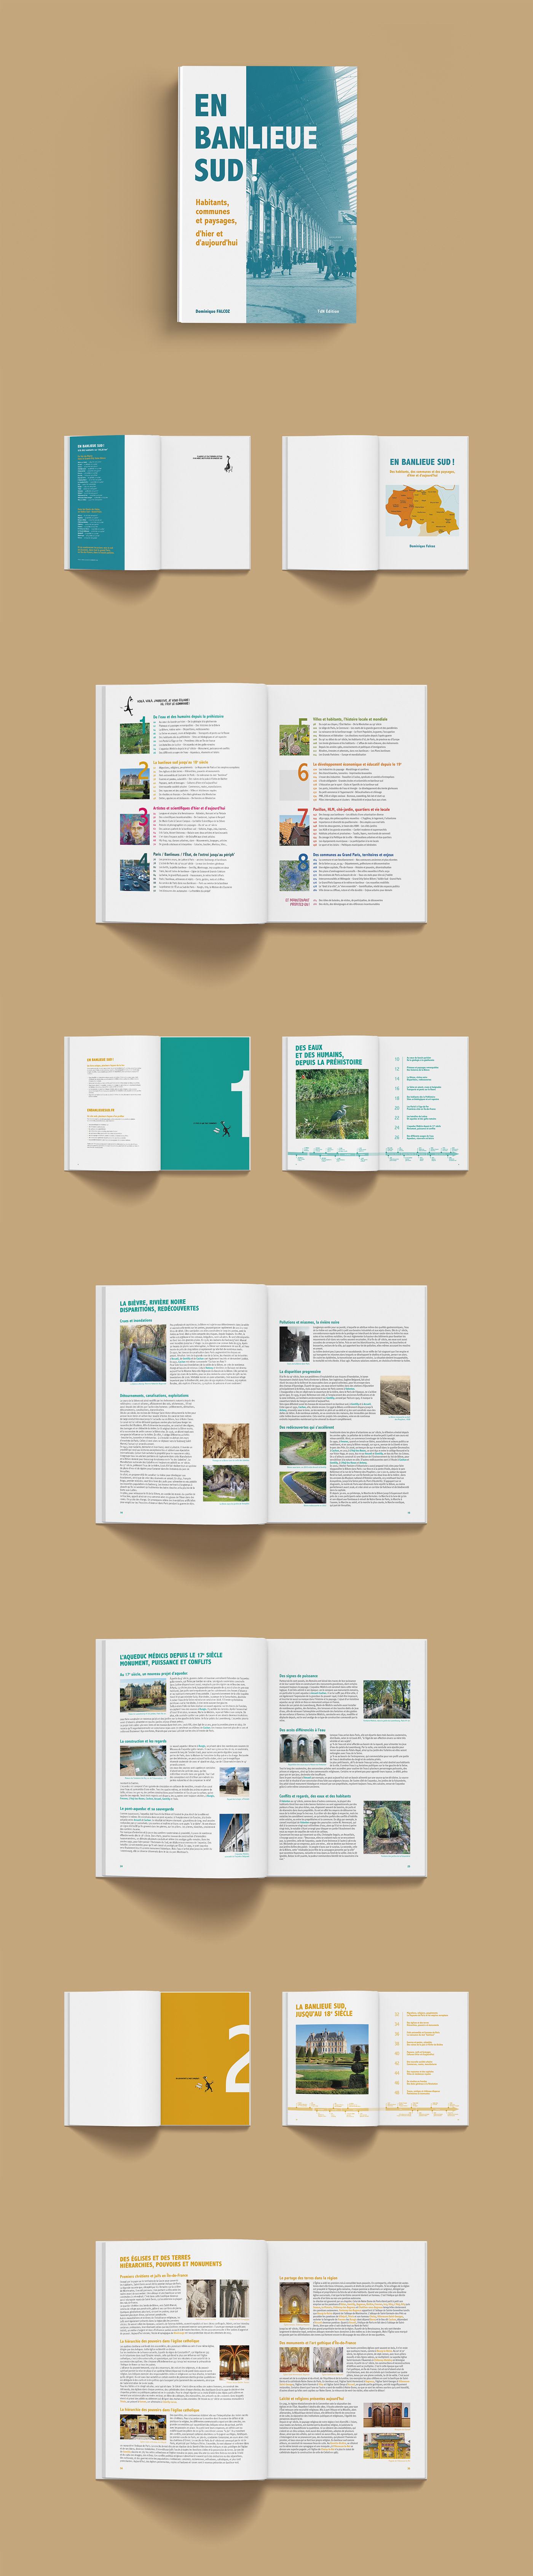 book book cover edition editorial editorial design  graphisme Layout livre mise en page print